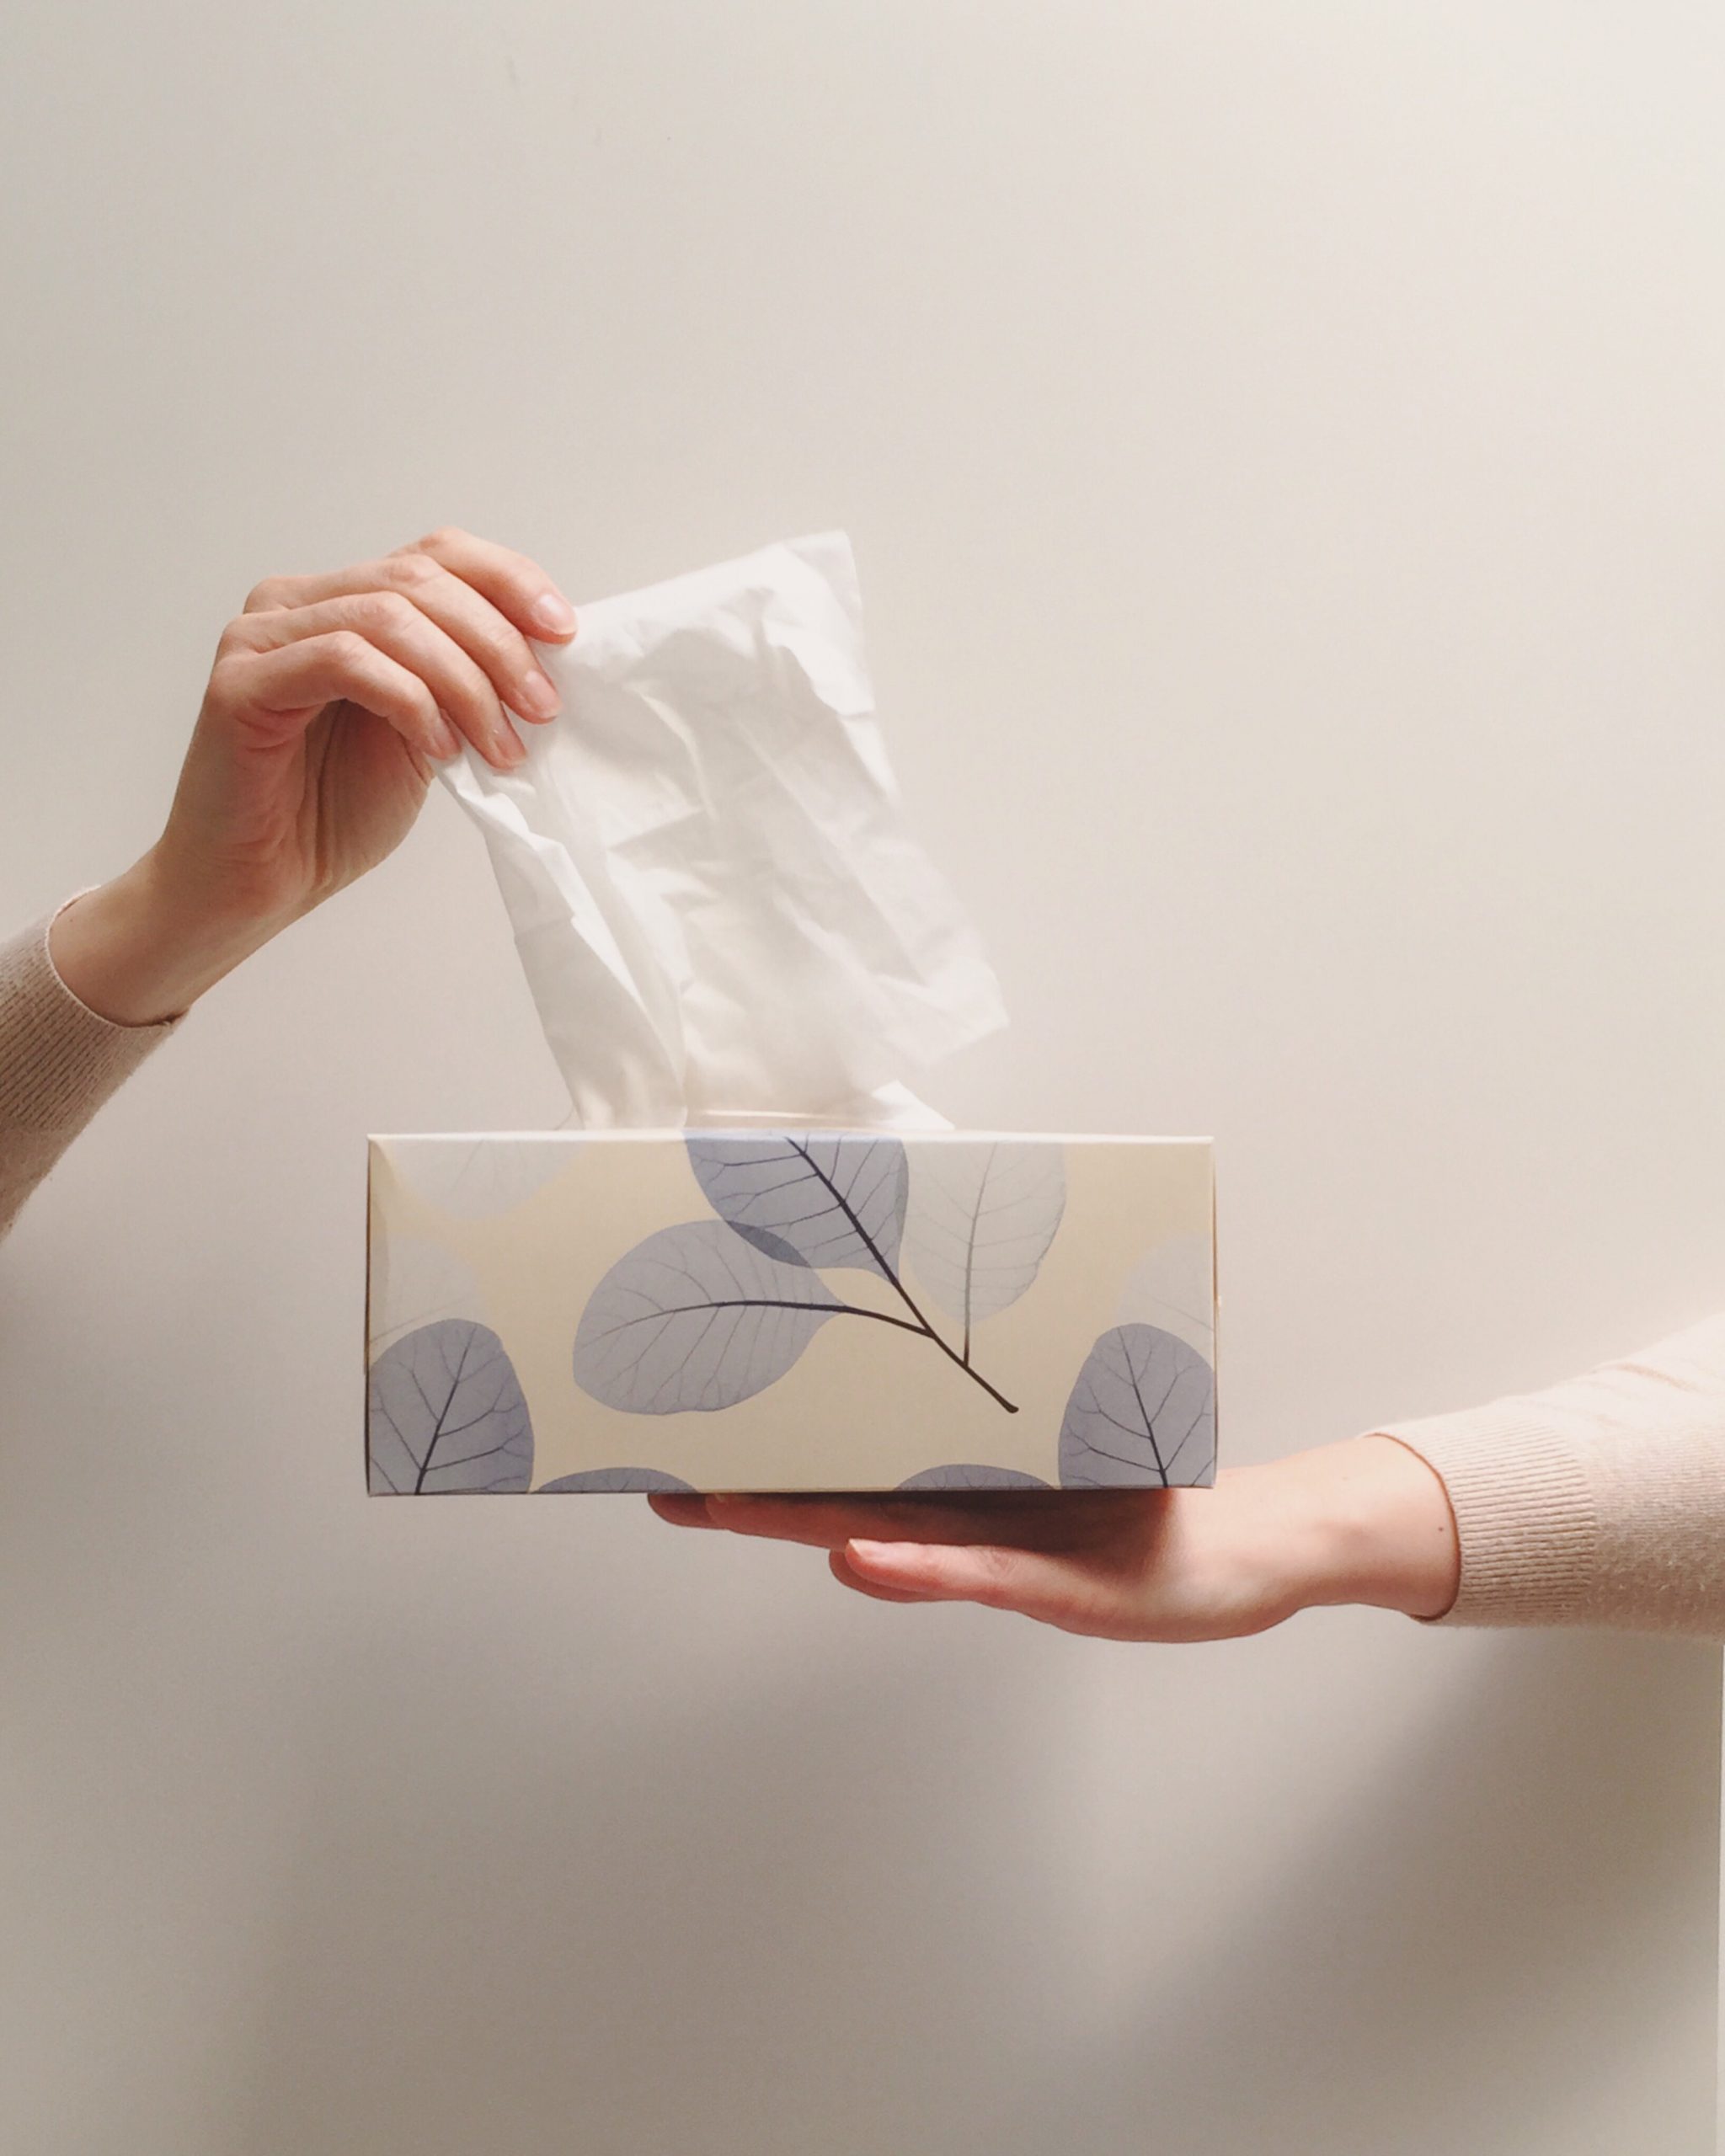 Hand taking tissue from a box